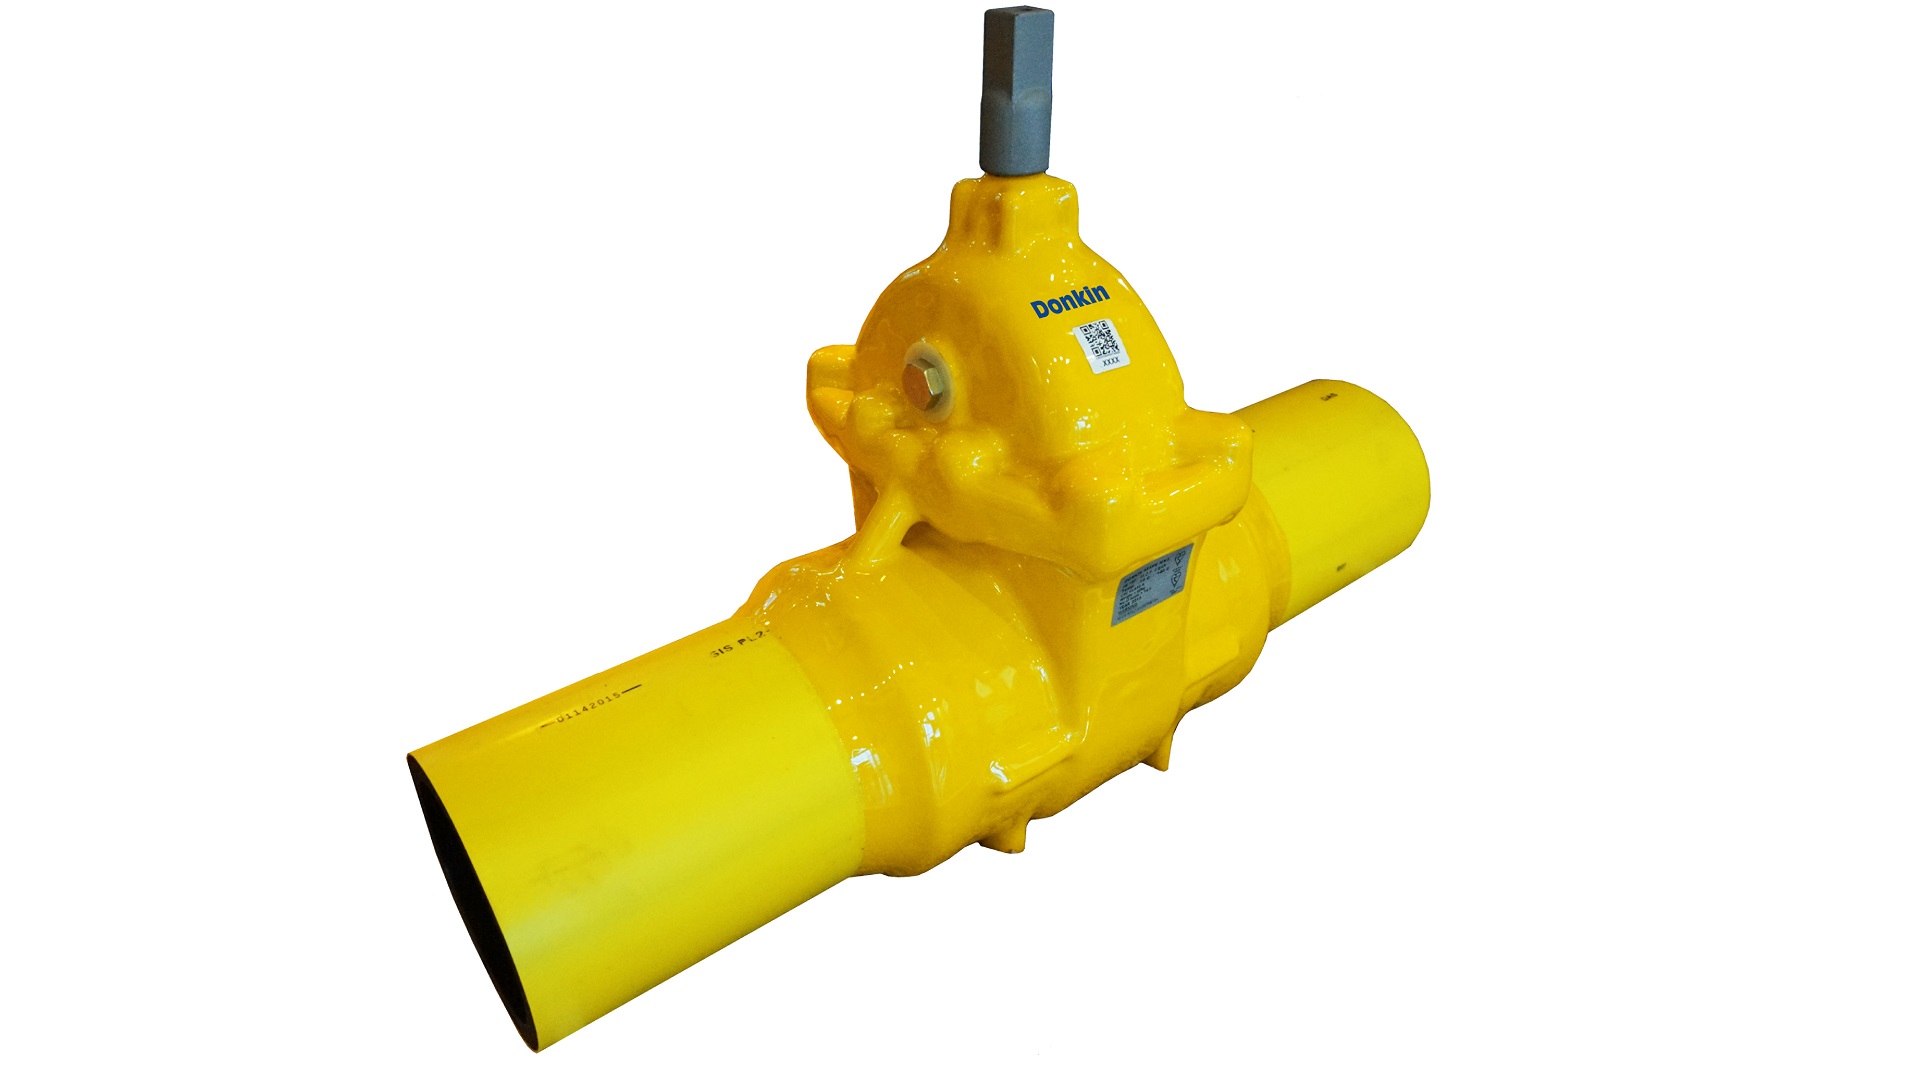 PUR Coated Gate valve with PE tail ends